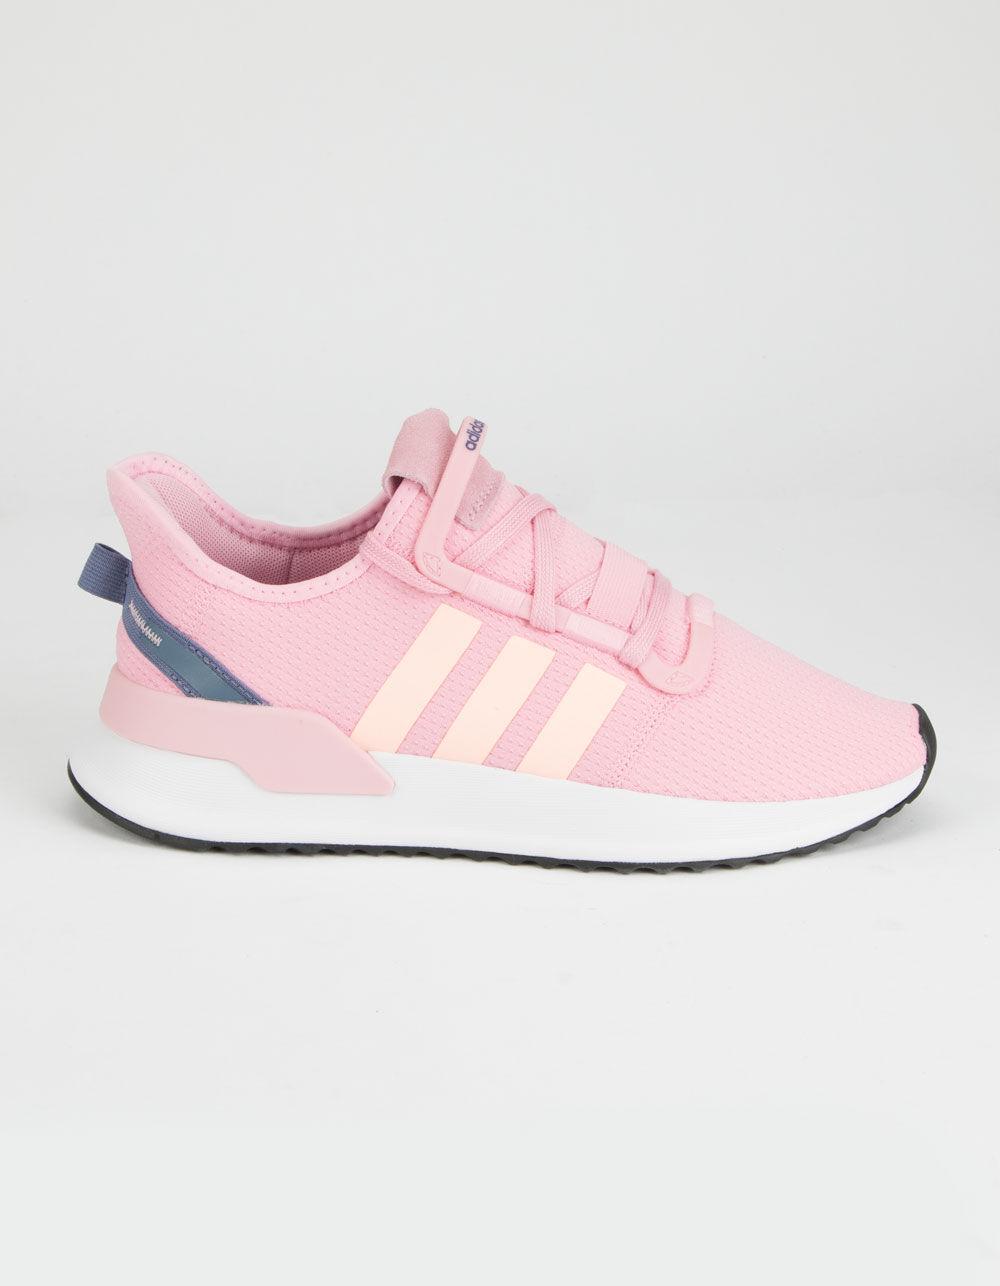 adidas Rubber U Path Run Running Shoes in Pink - Save 62% - Lyst